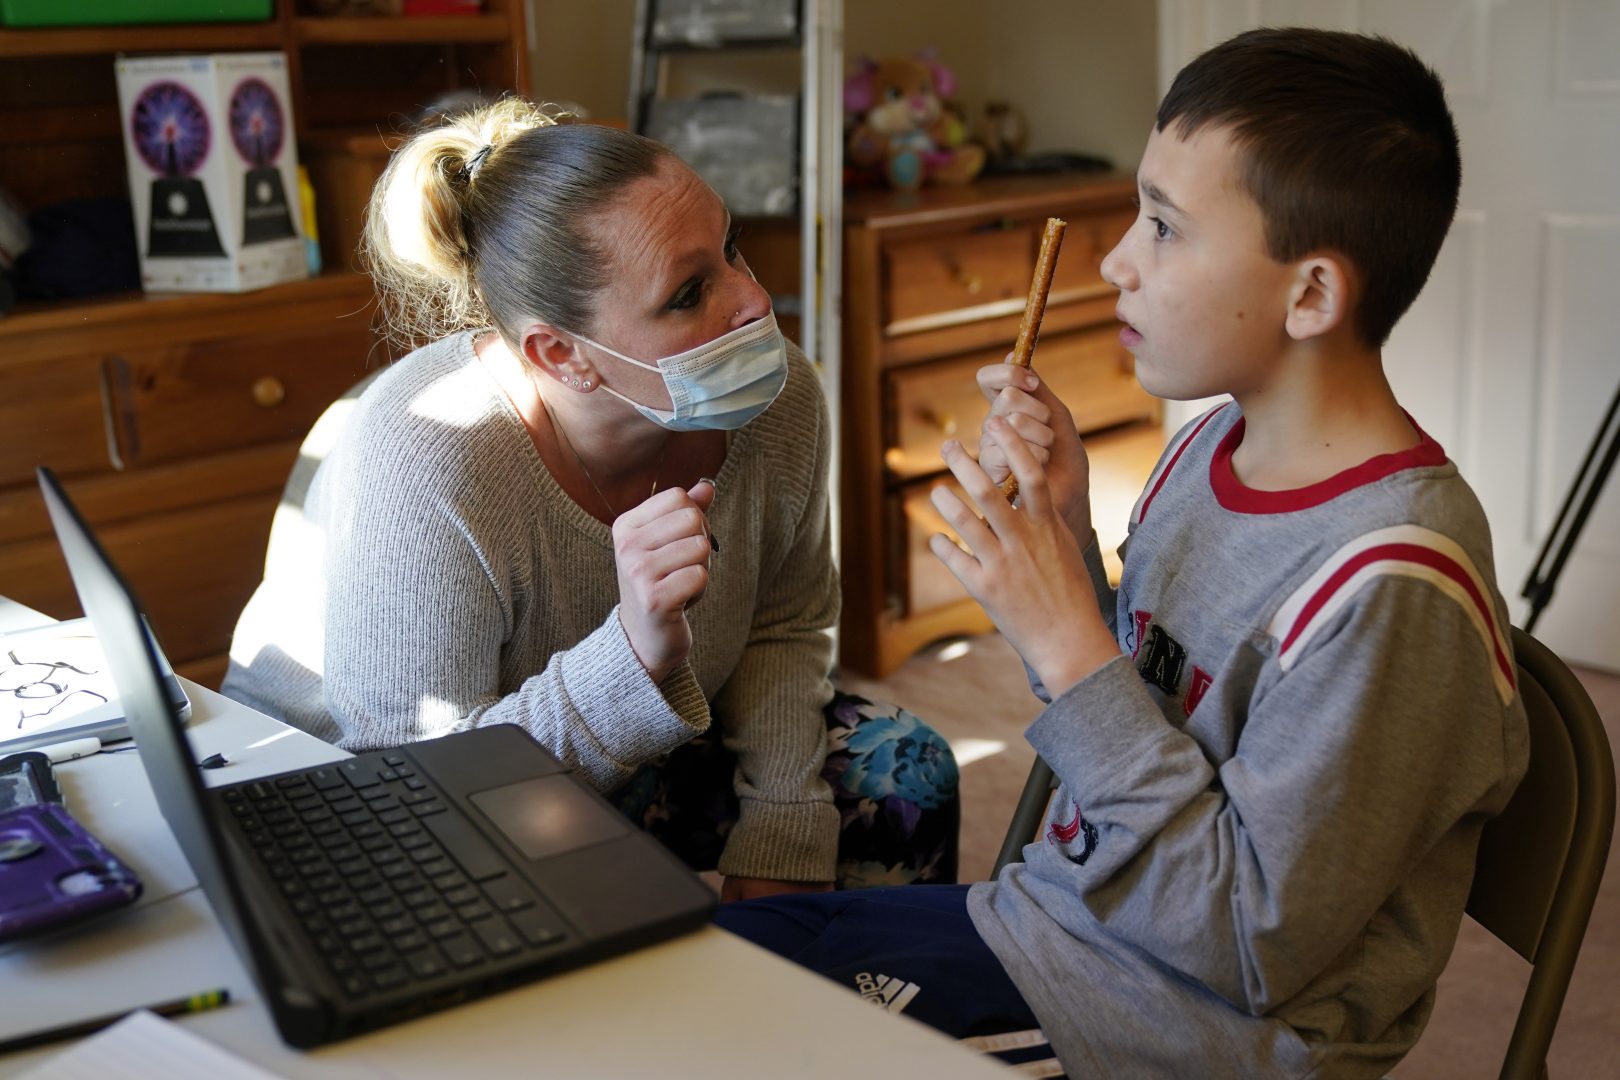 In this Associcated Press photo, paraprofessional Jessica Wein helps Josh Nazzaro, who lives with autism, with his classwork while attending class virtually from his home in Wharton, N.J., Wednesday, Nov. 18, 2020.  In Pa., a change  a state policy change is barring some children with autism from being covered by Medical Assistance for a type of one-on-one therapy.